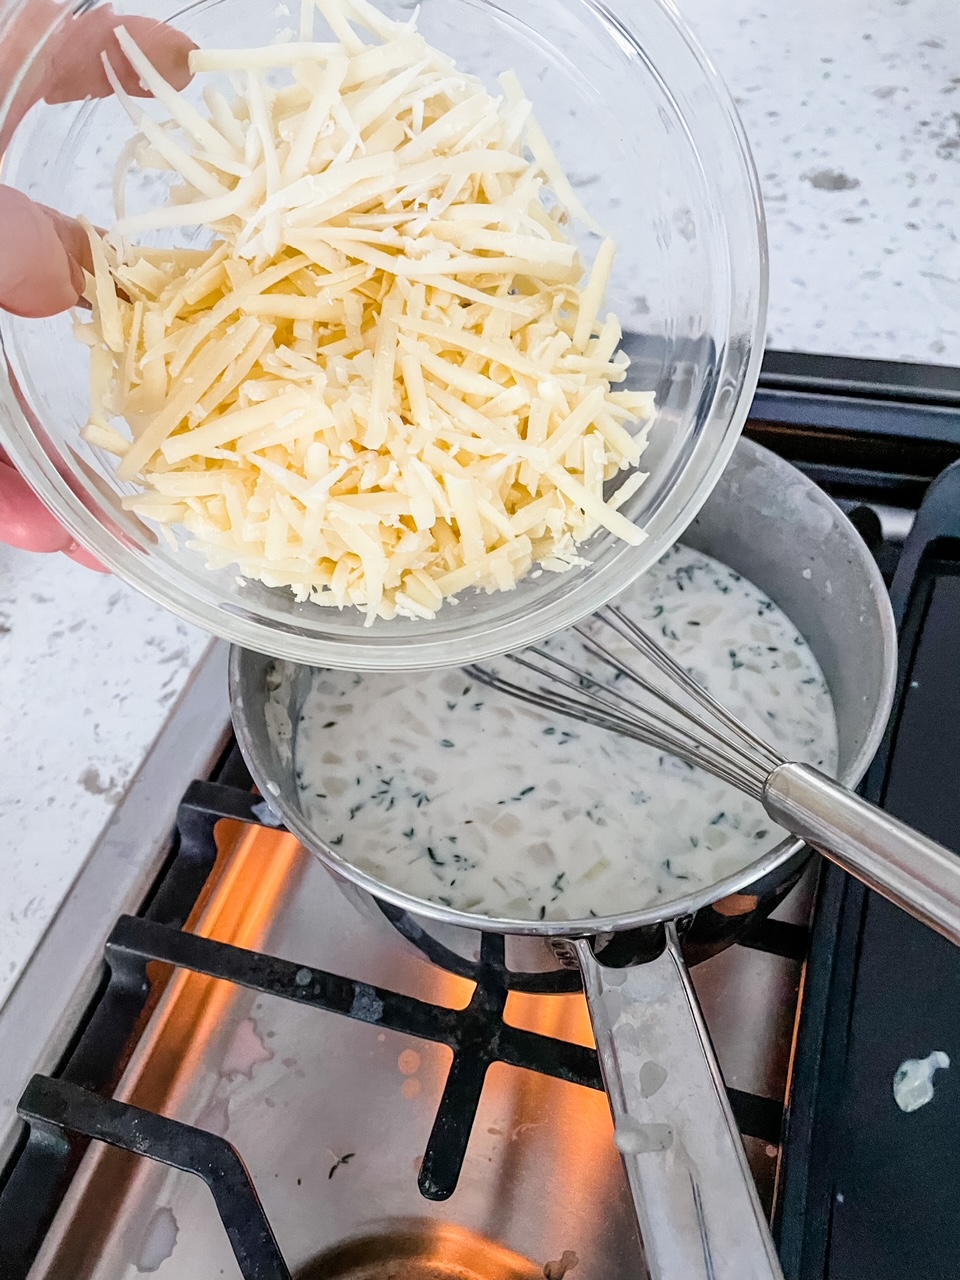 Shredded gruyere cheese being poured into the sauce mixture